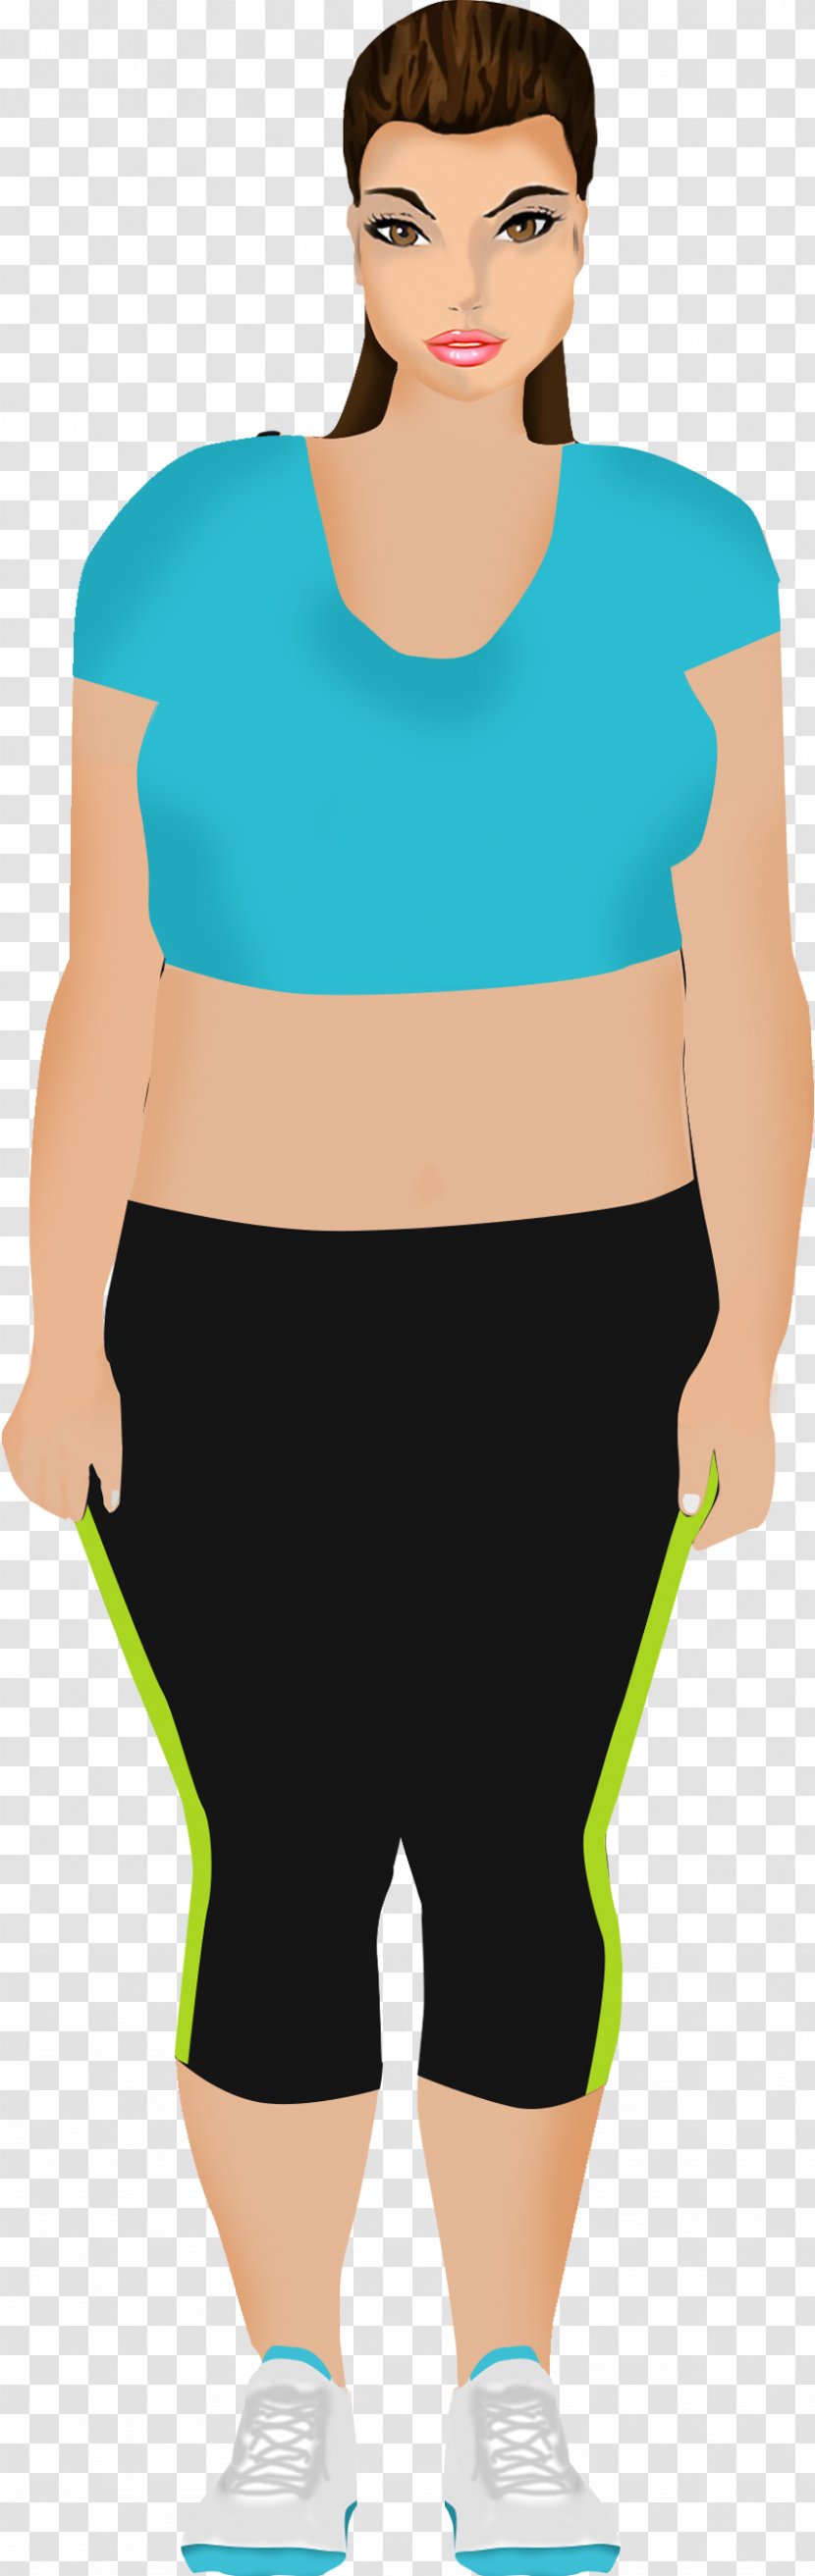 Weight Loss Healthy Diet Exercise - Boy - Fast Food Transparent PNG